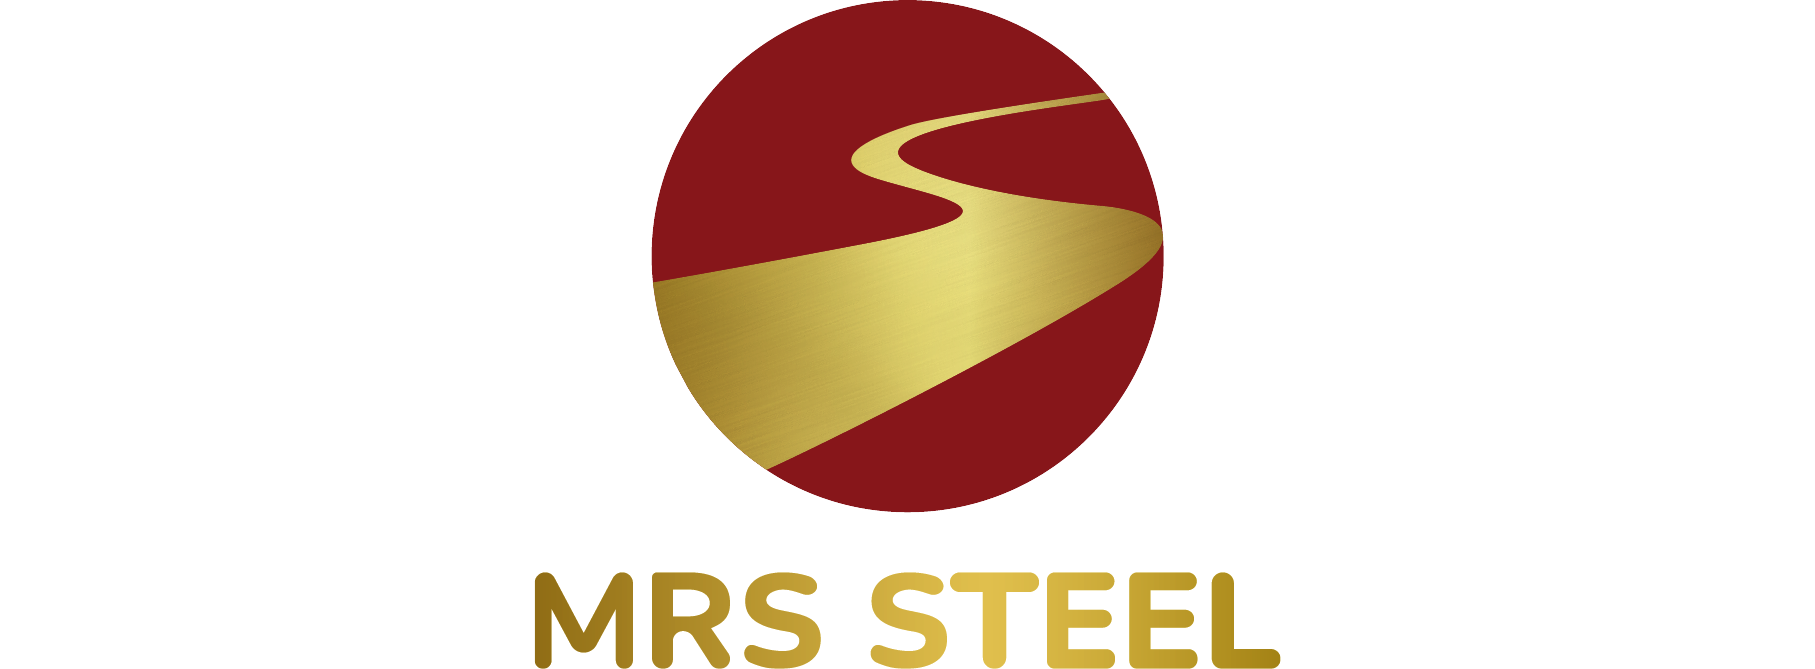 MRS STEEL - Trusted partner to import steel from Vietnam